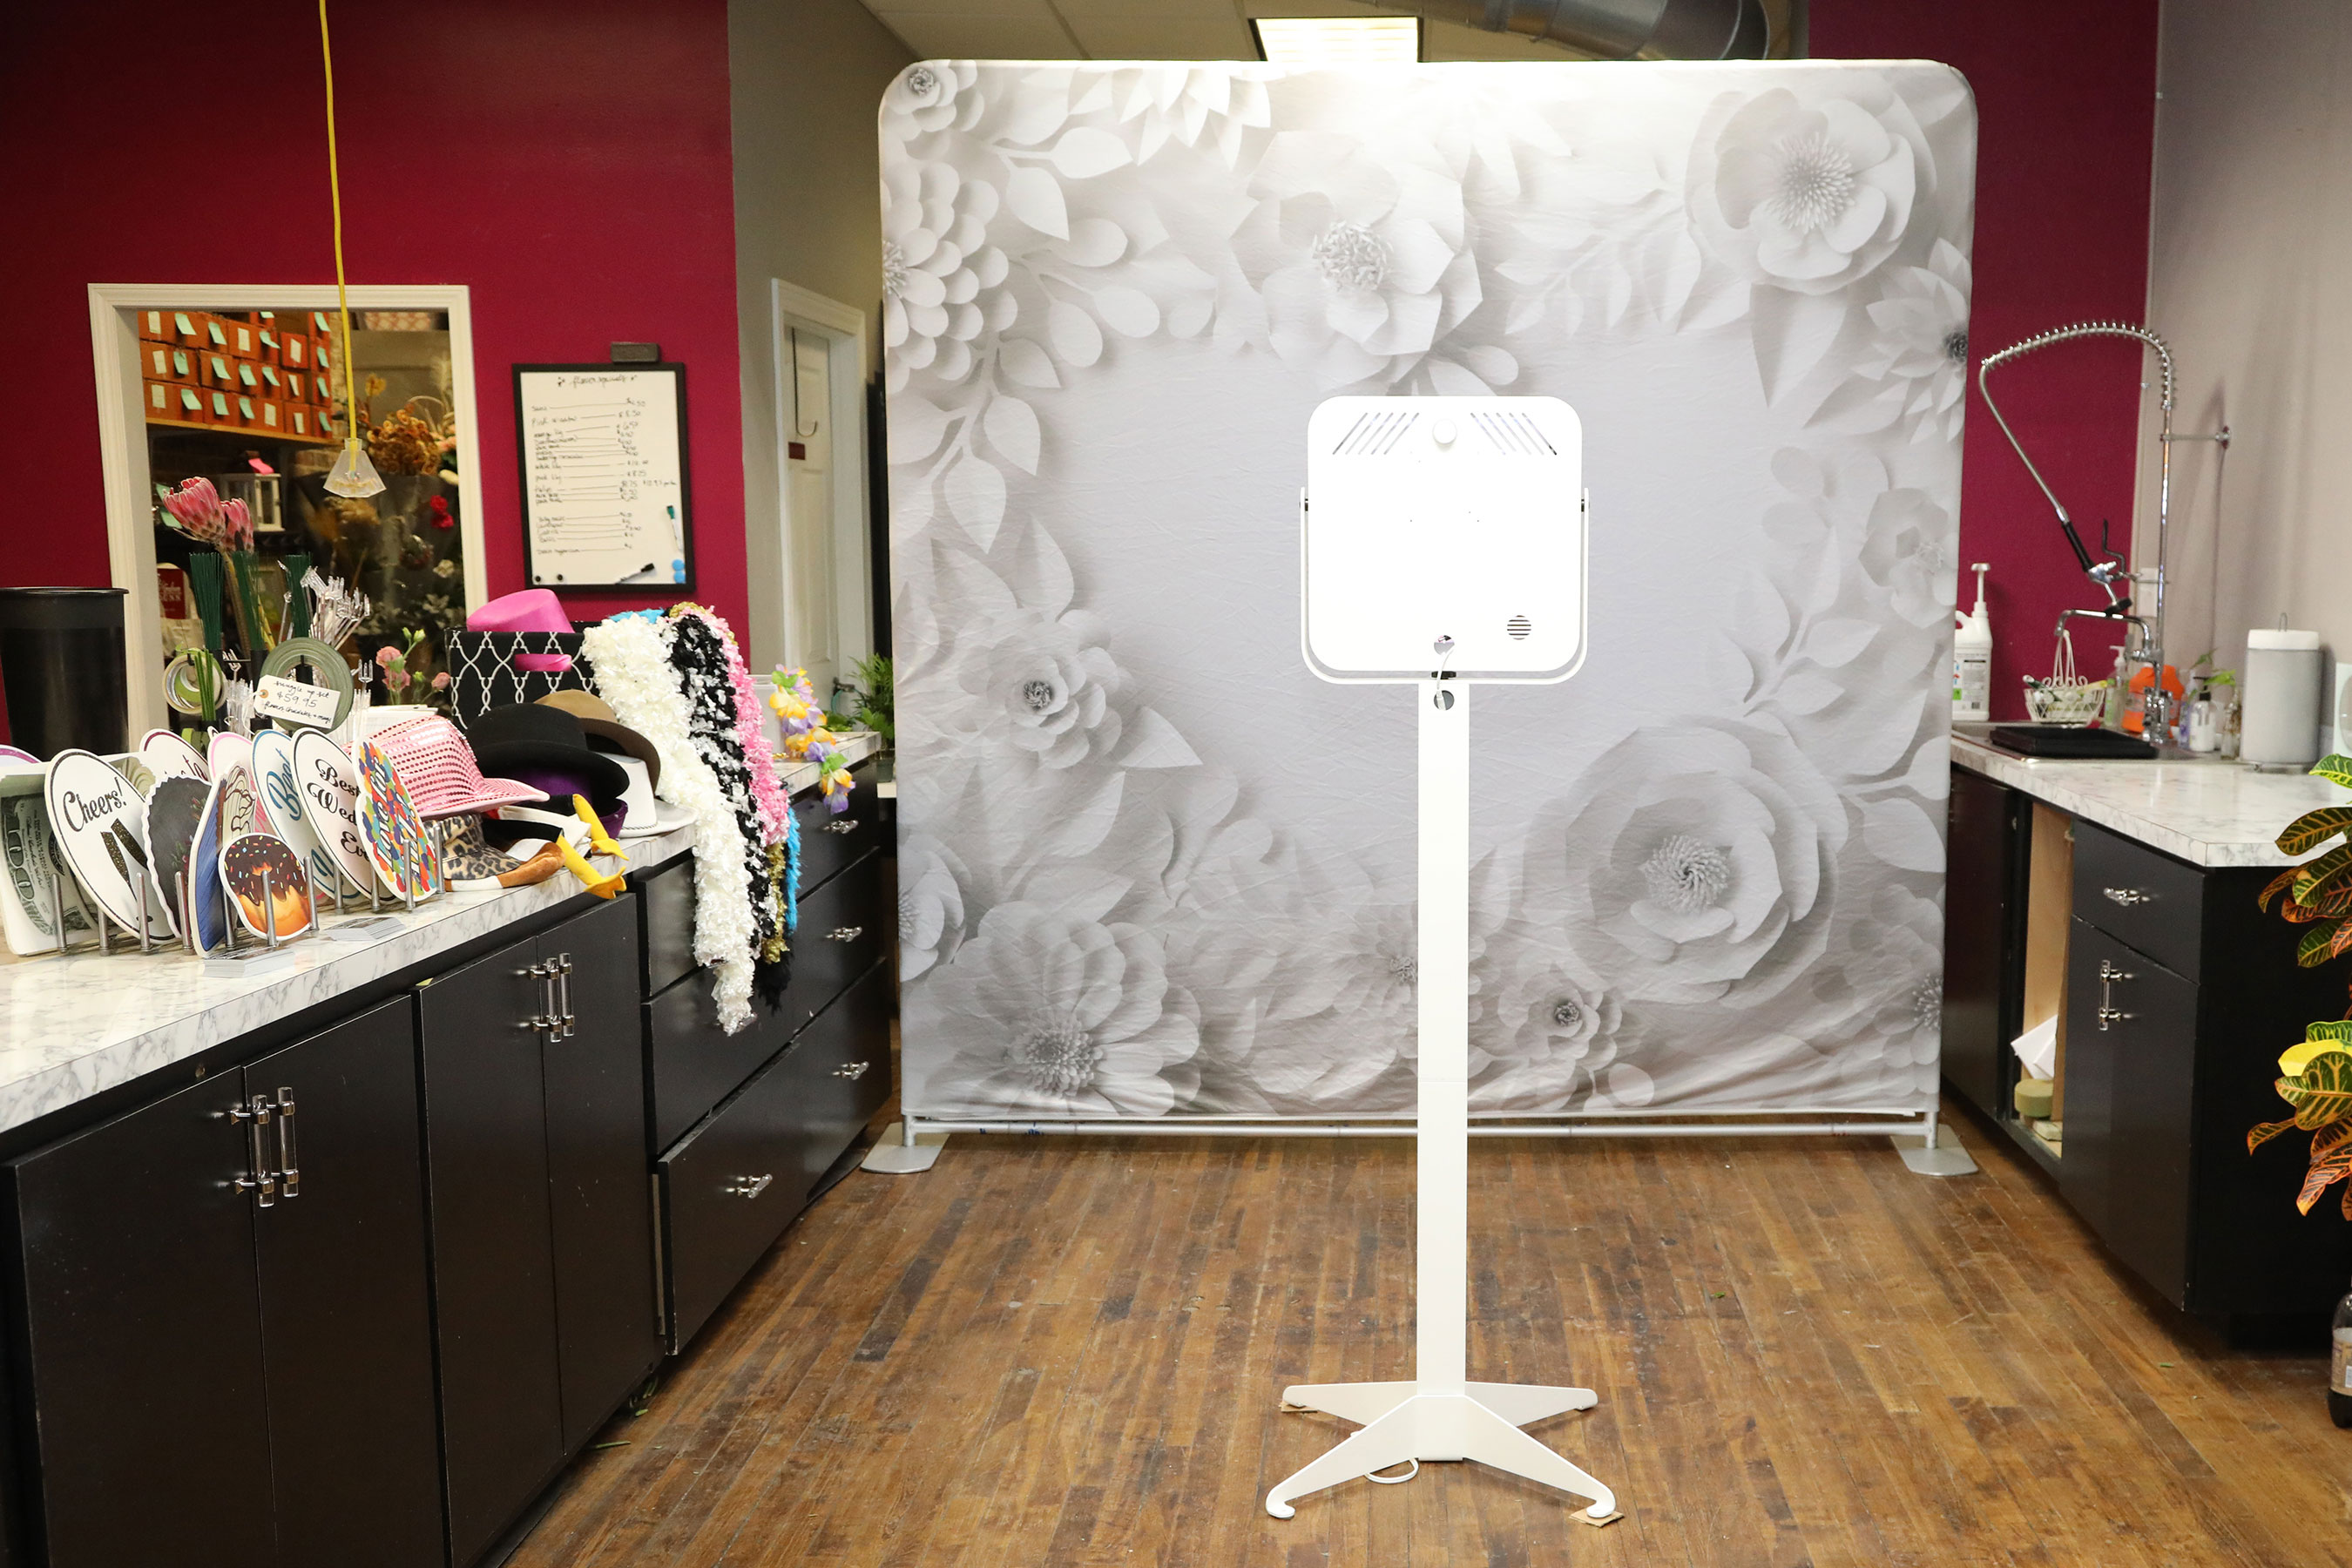 Explorer Digital Photo Booth at Beautiful Blooms by Jen for the first Love is in the Air Red Bird Sylvania First Friday